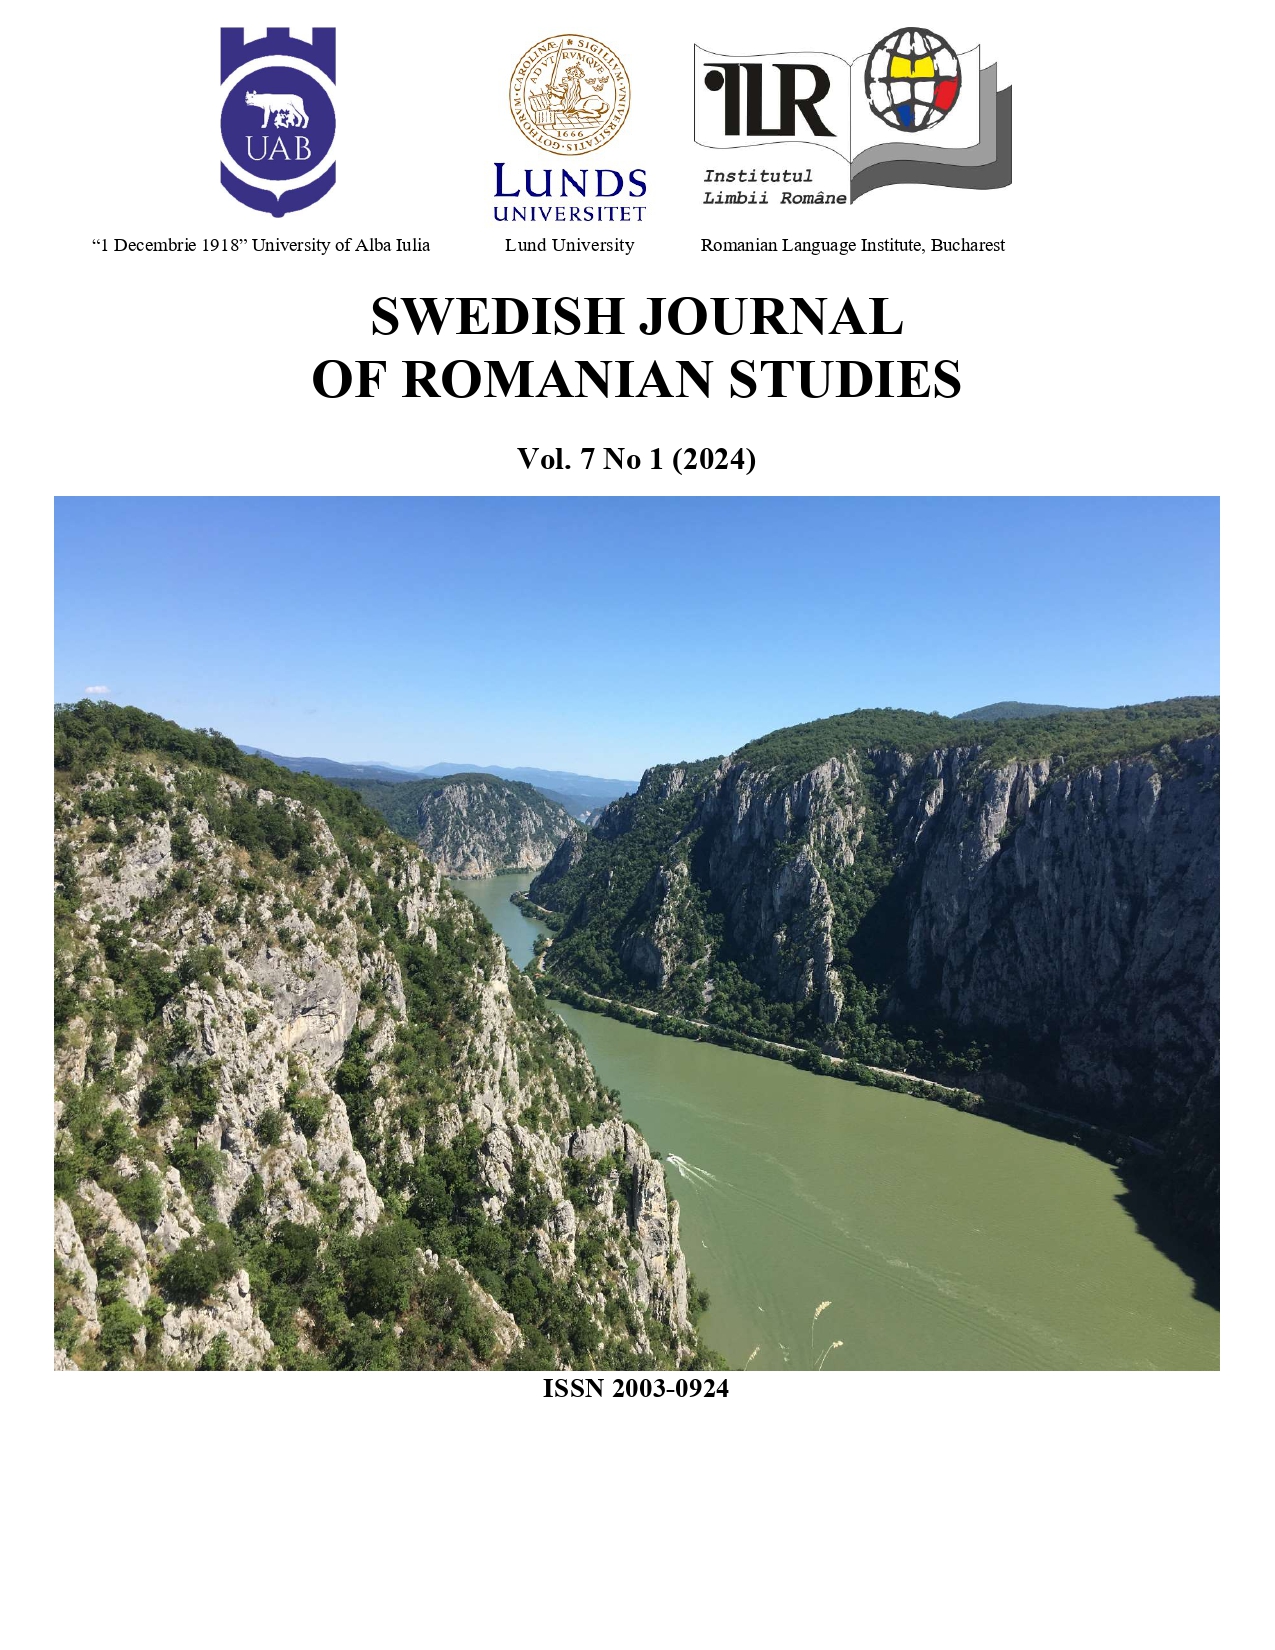 Historiographic imaginary and hypotheses of heredity in the configuration of Romanian cultural identity